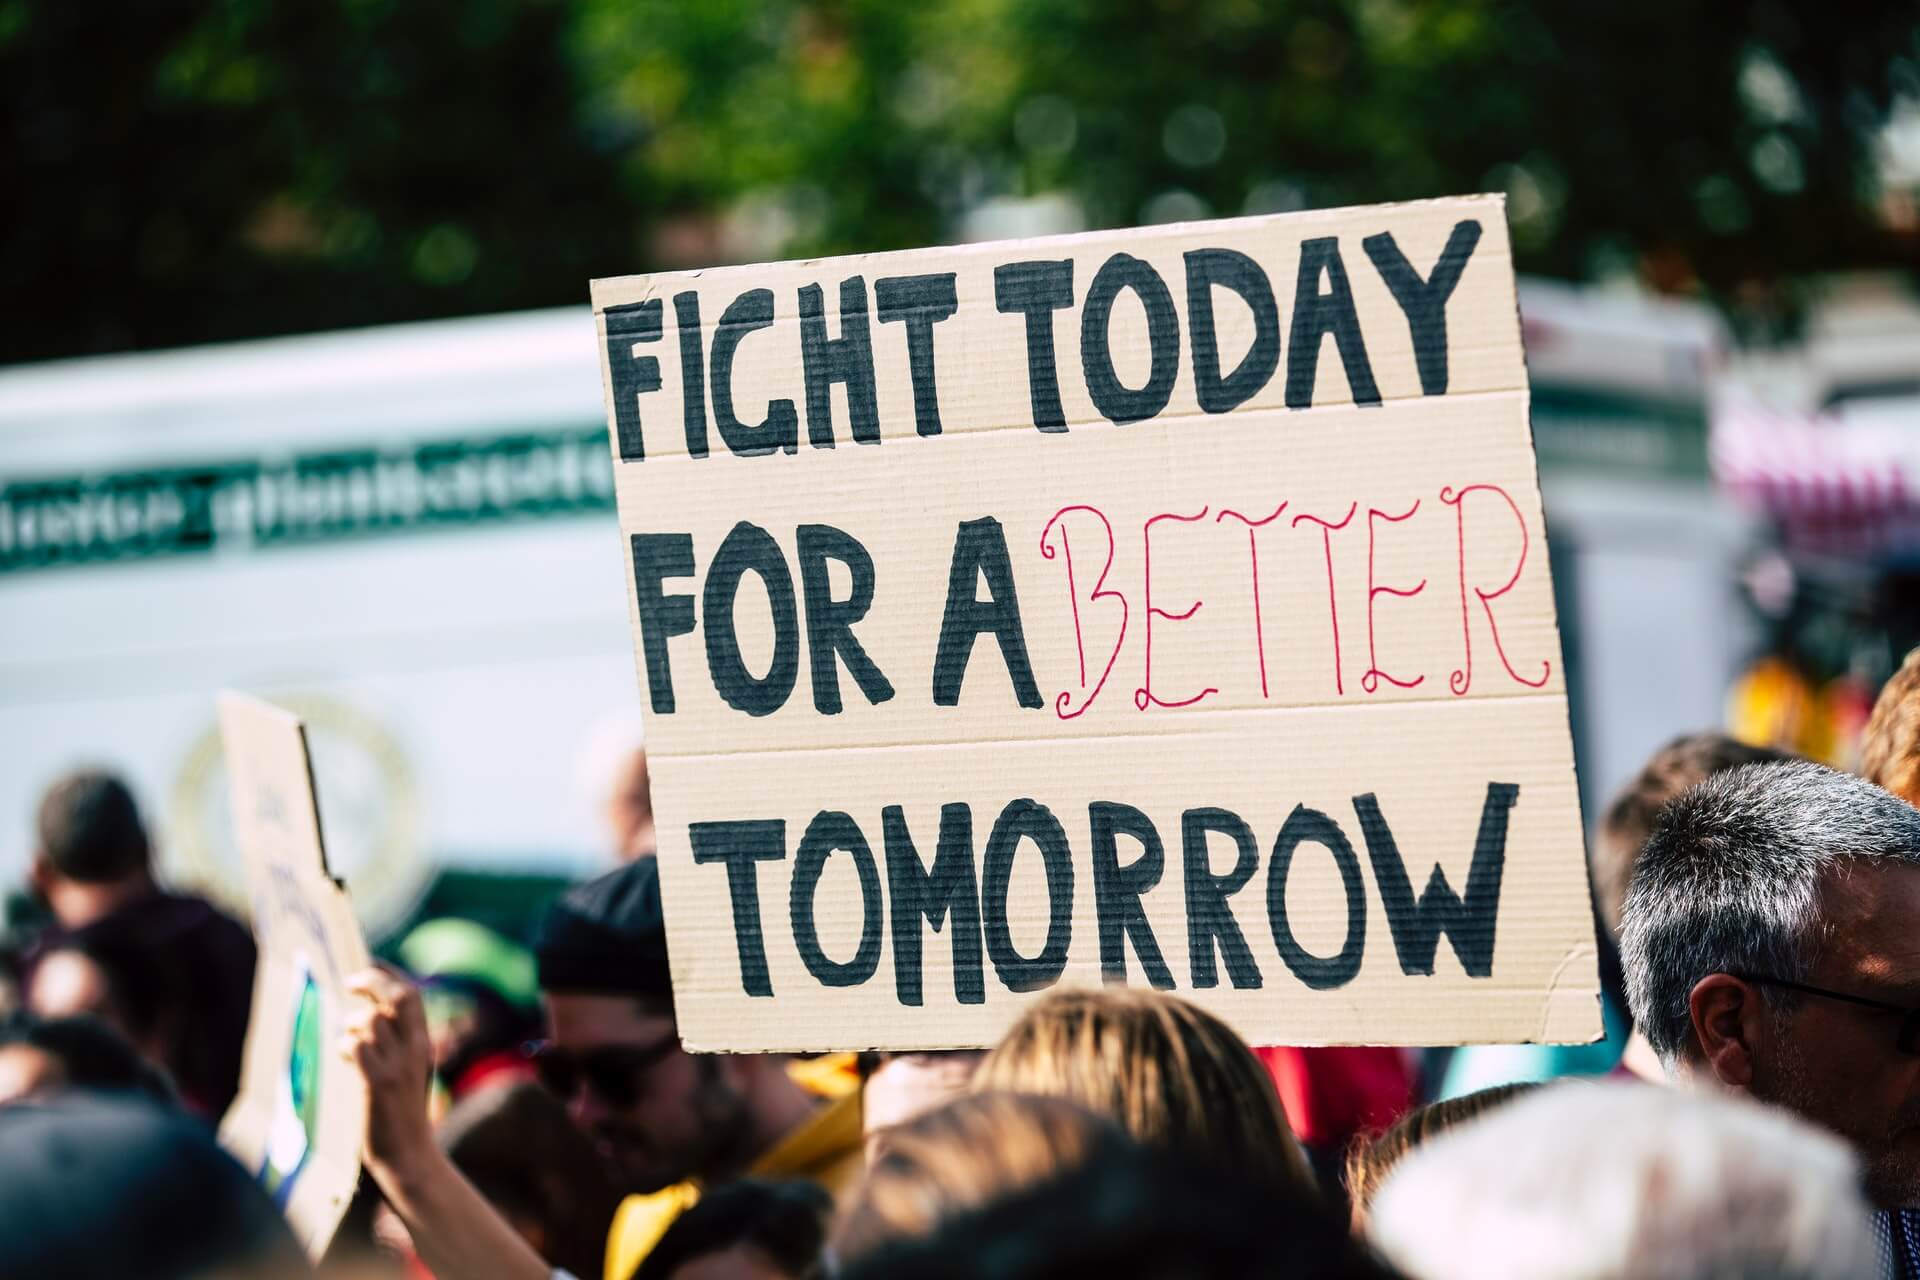 Person holding sign "Fight today for a better tomorrow"